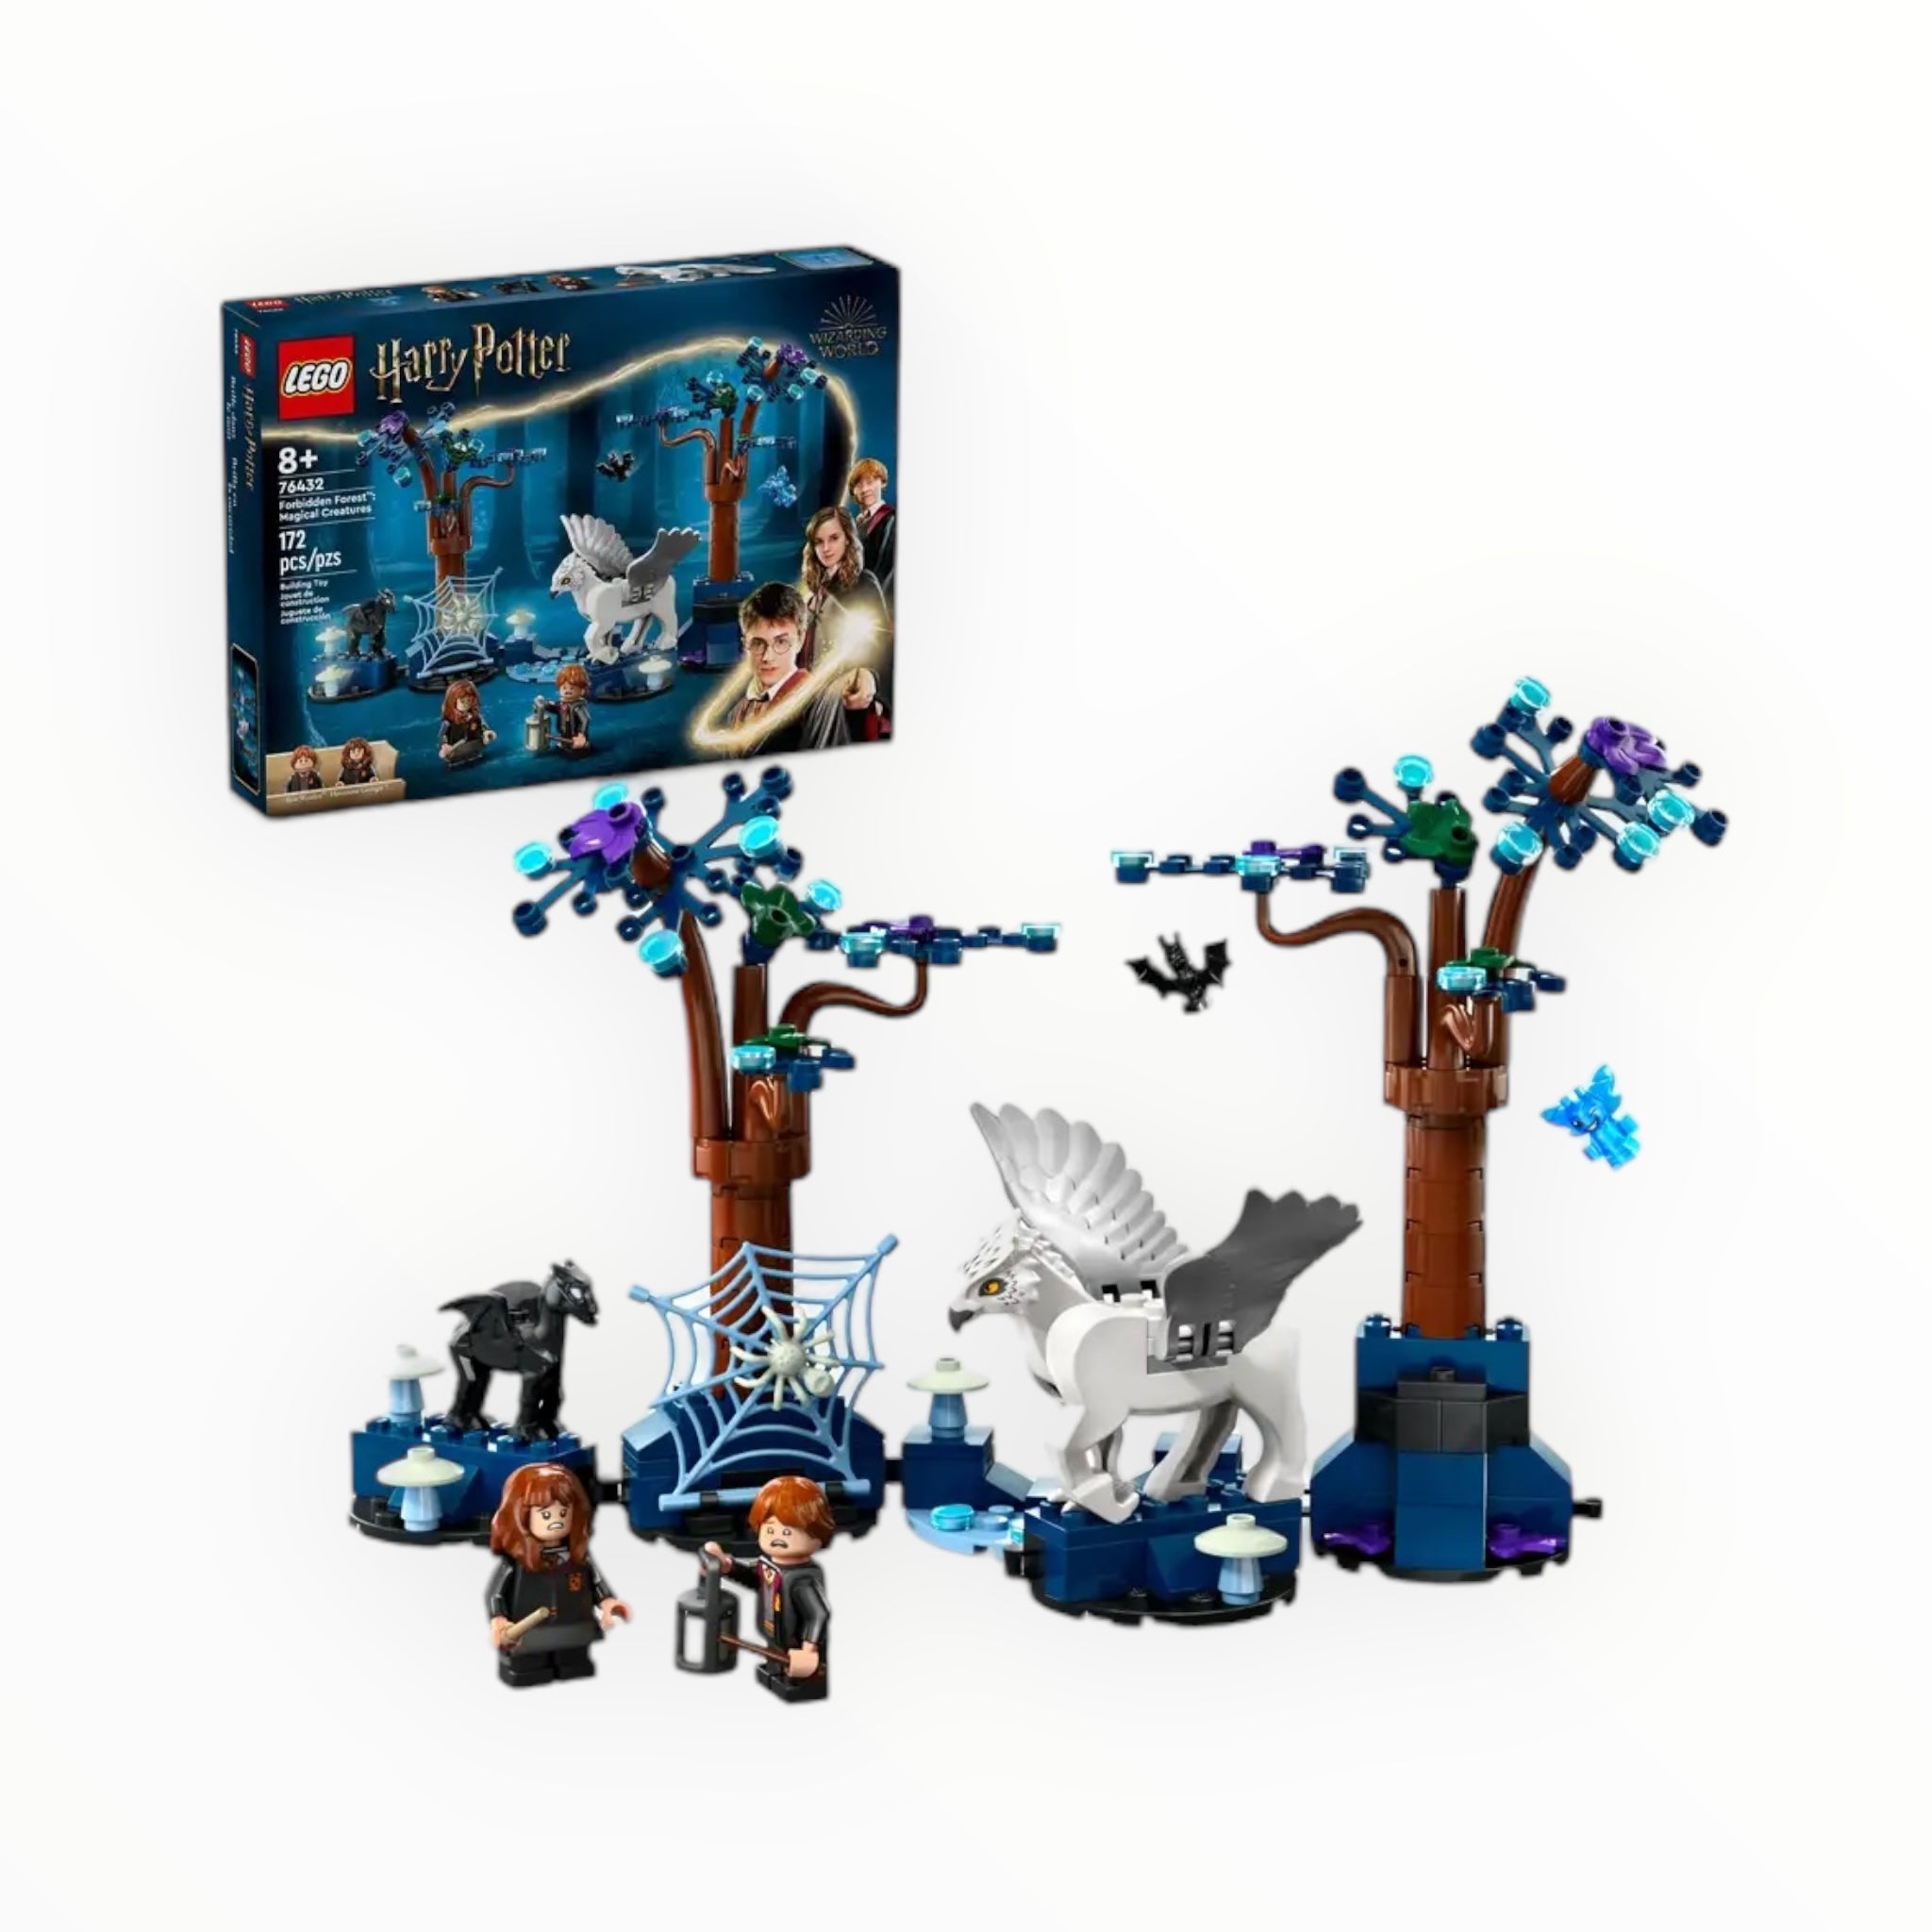 76432 Harry Potter Forbidden Forest: Magical Creatures